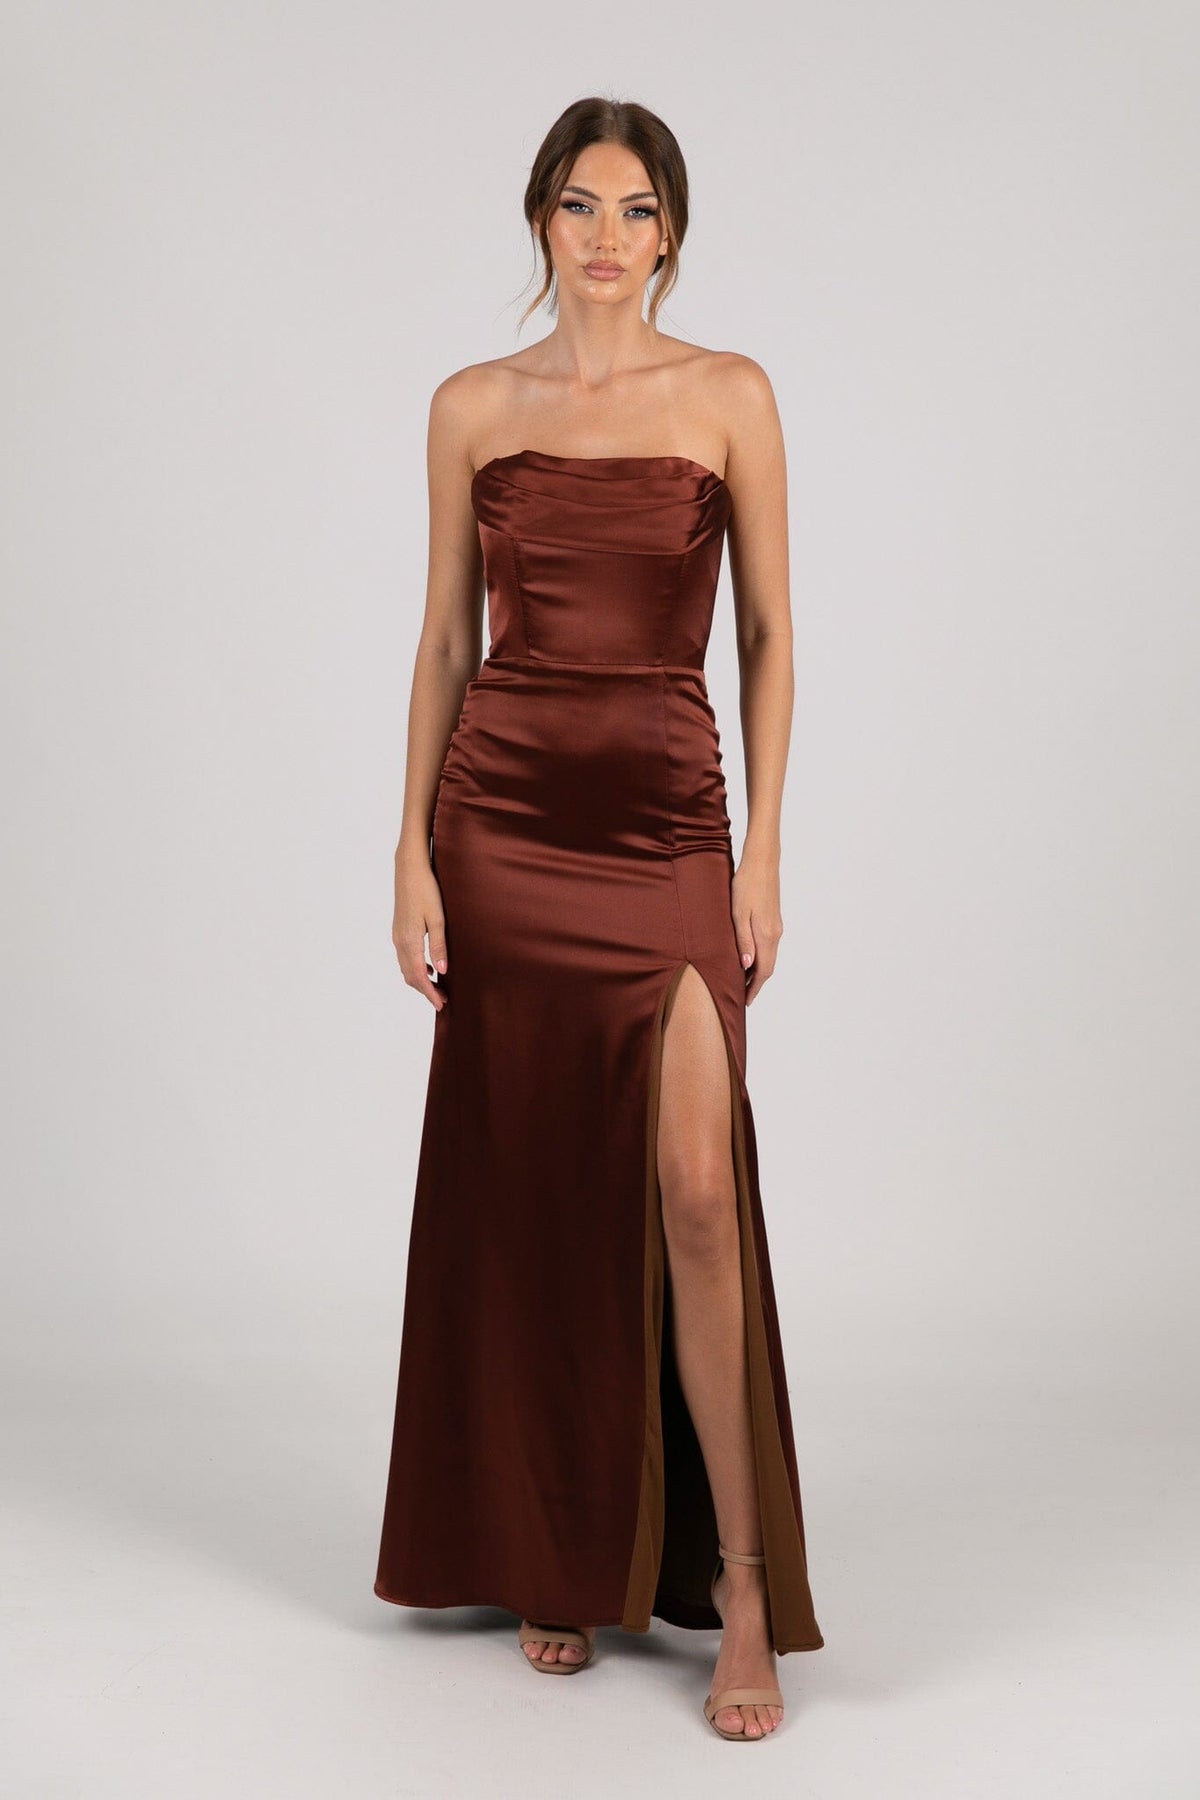 Mahogany Dark Brown Red Strapless Satin Maxi Dress with Draped Bust Detail and Side Slit